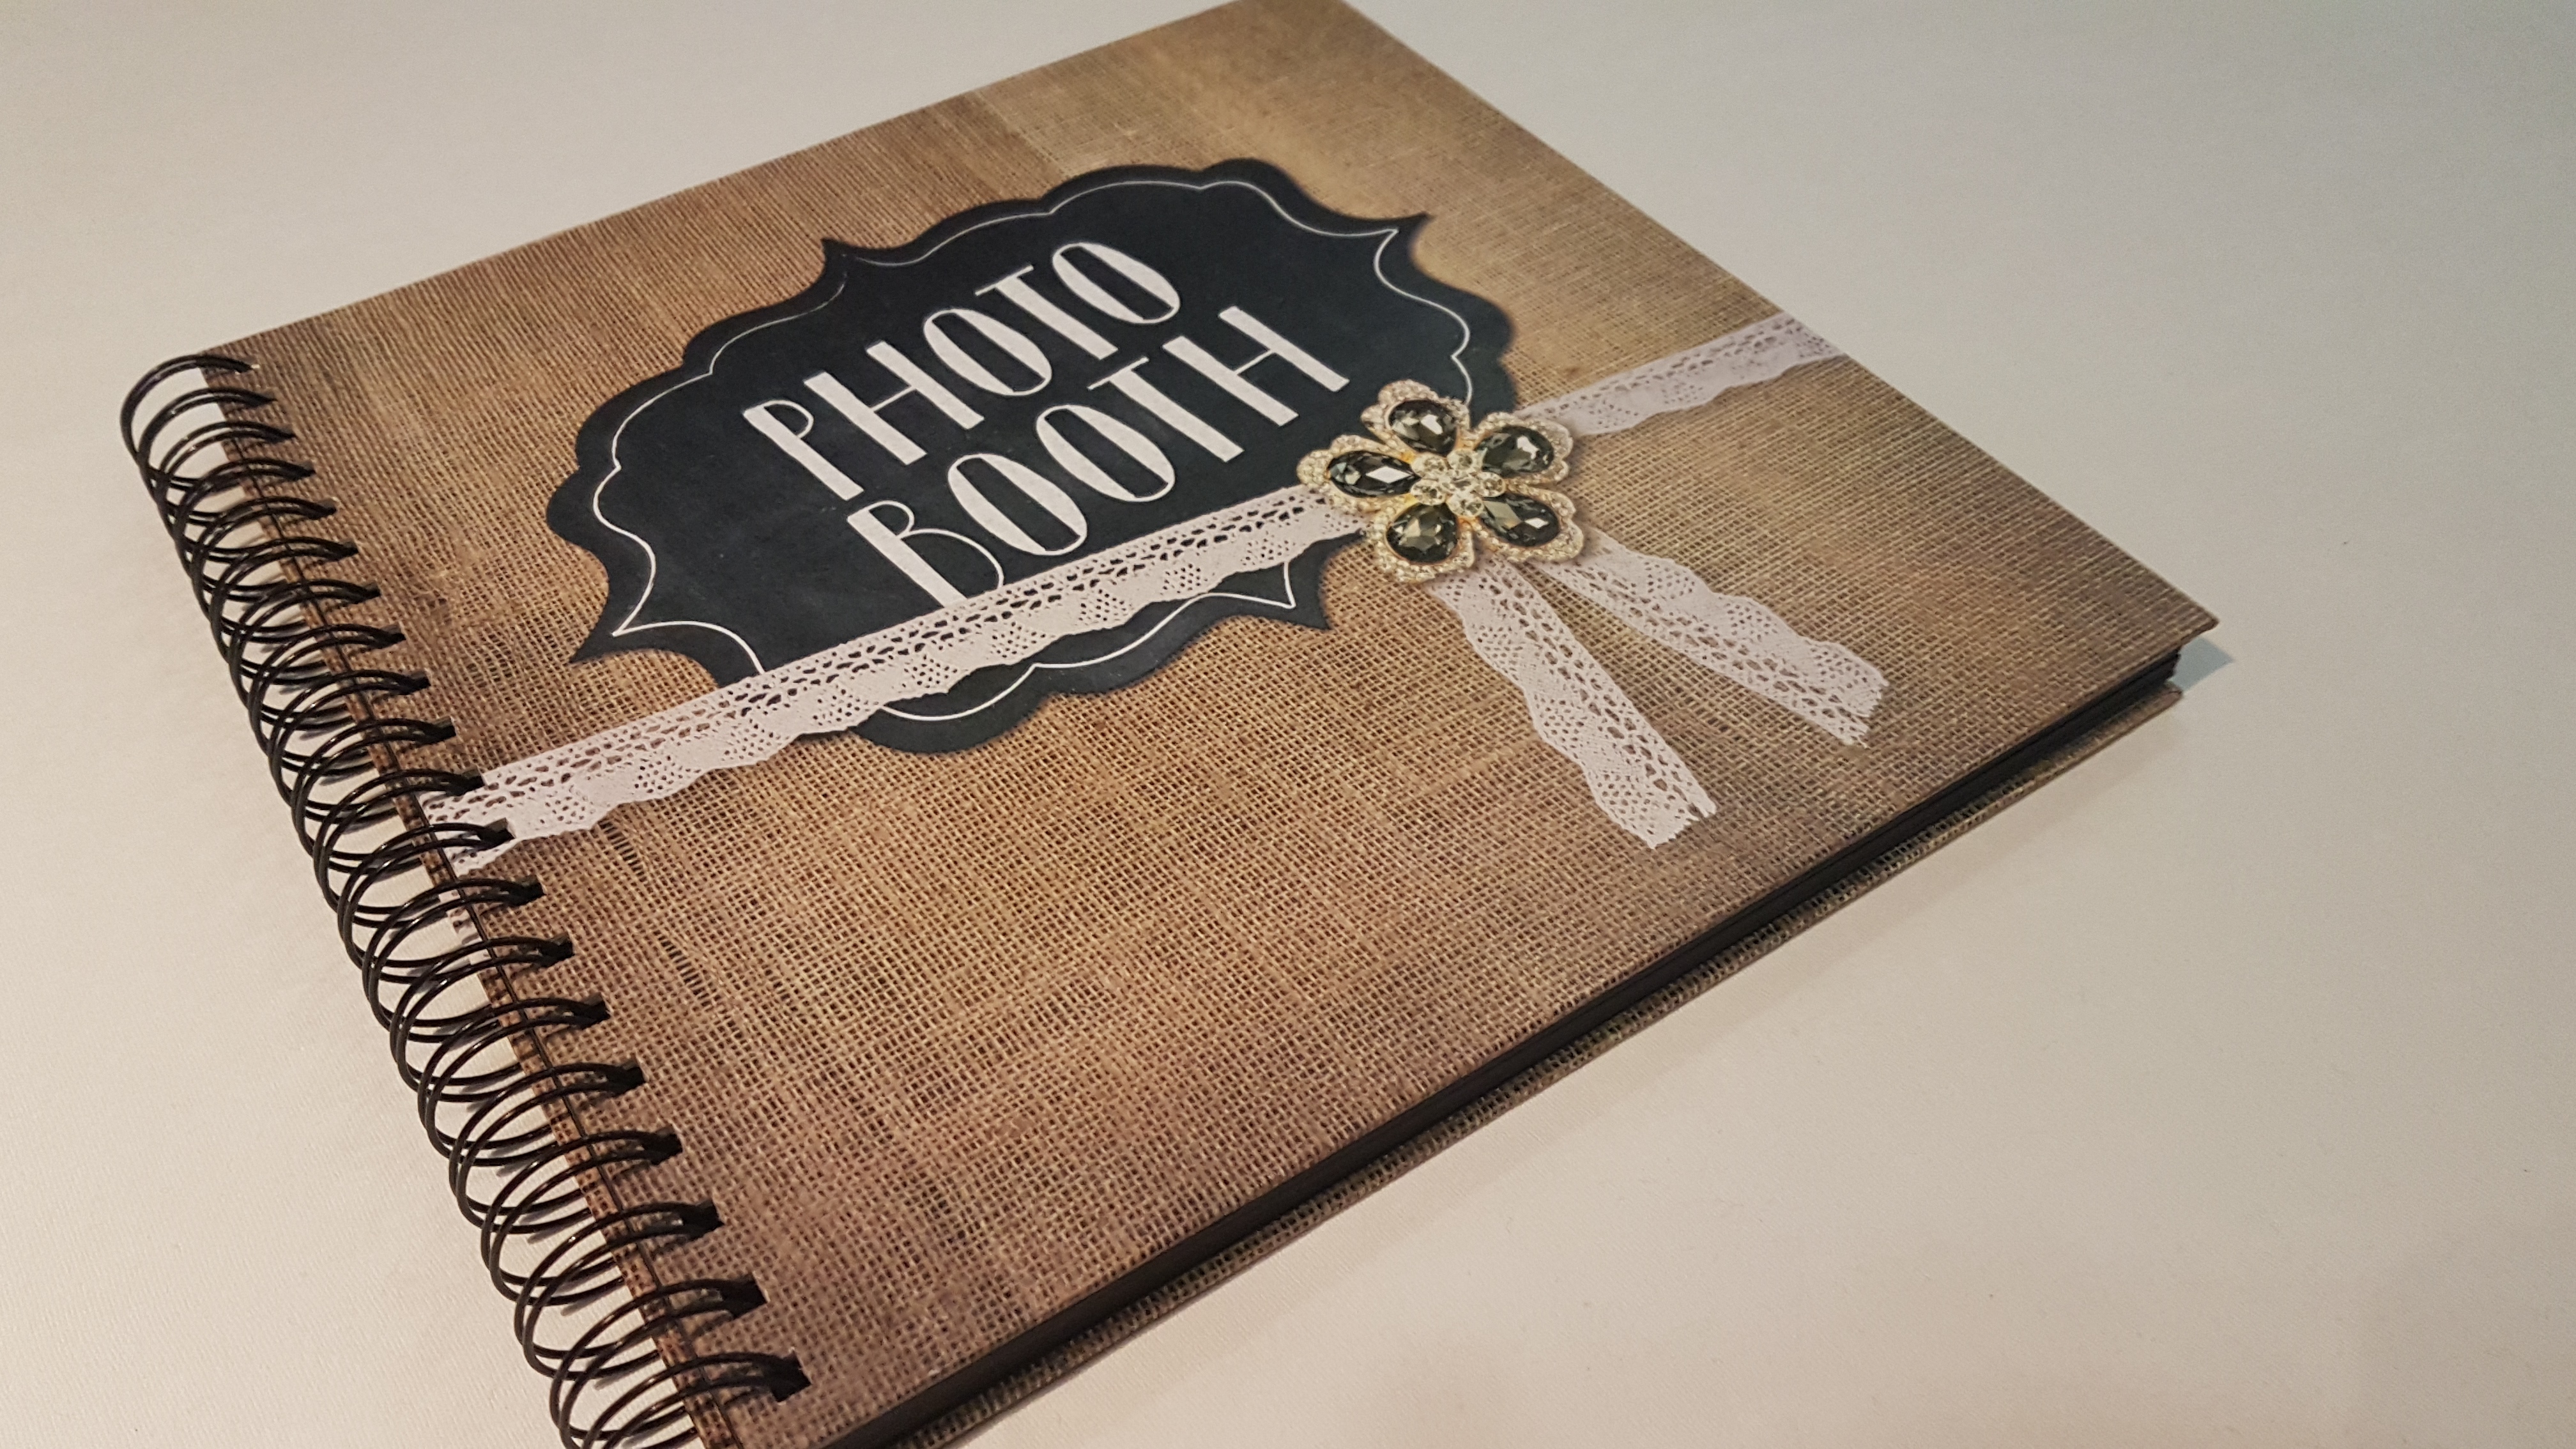 Photo Booth guest book